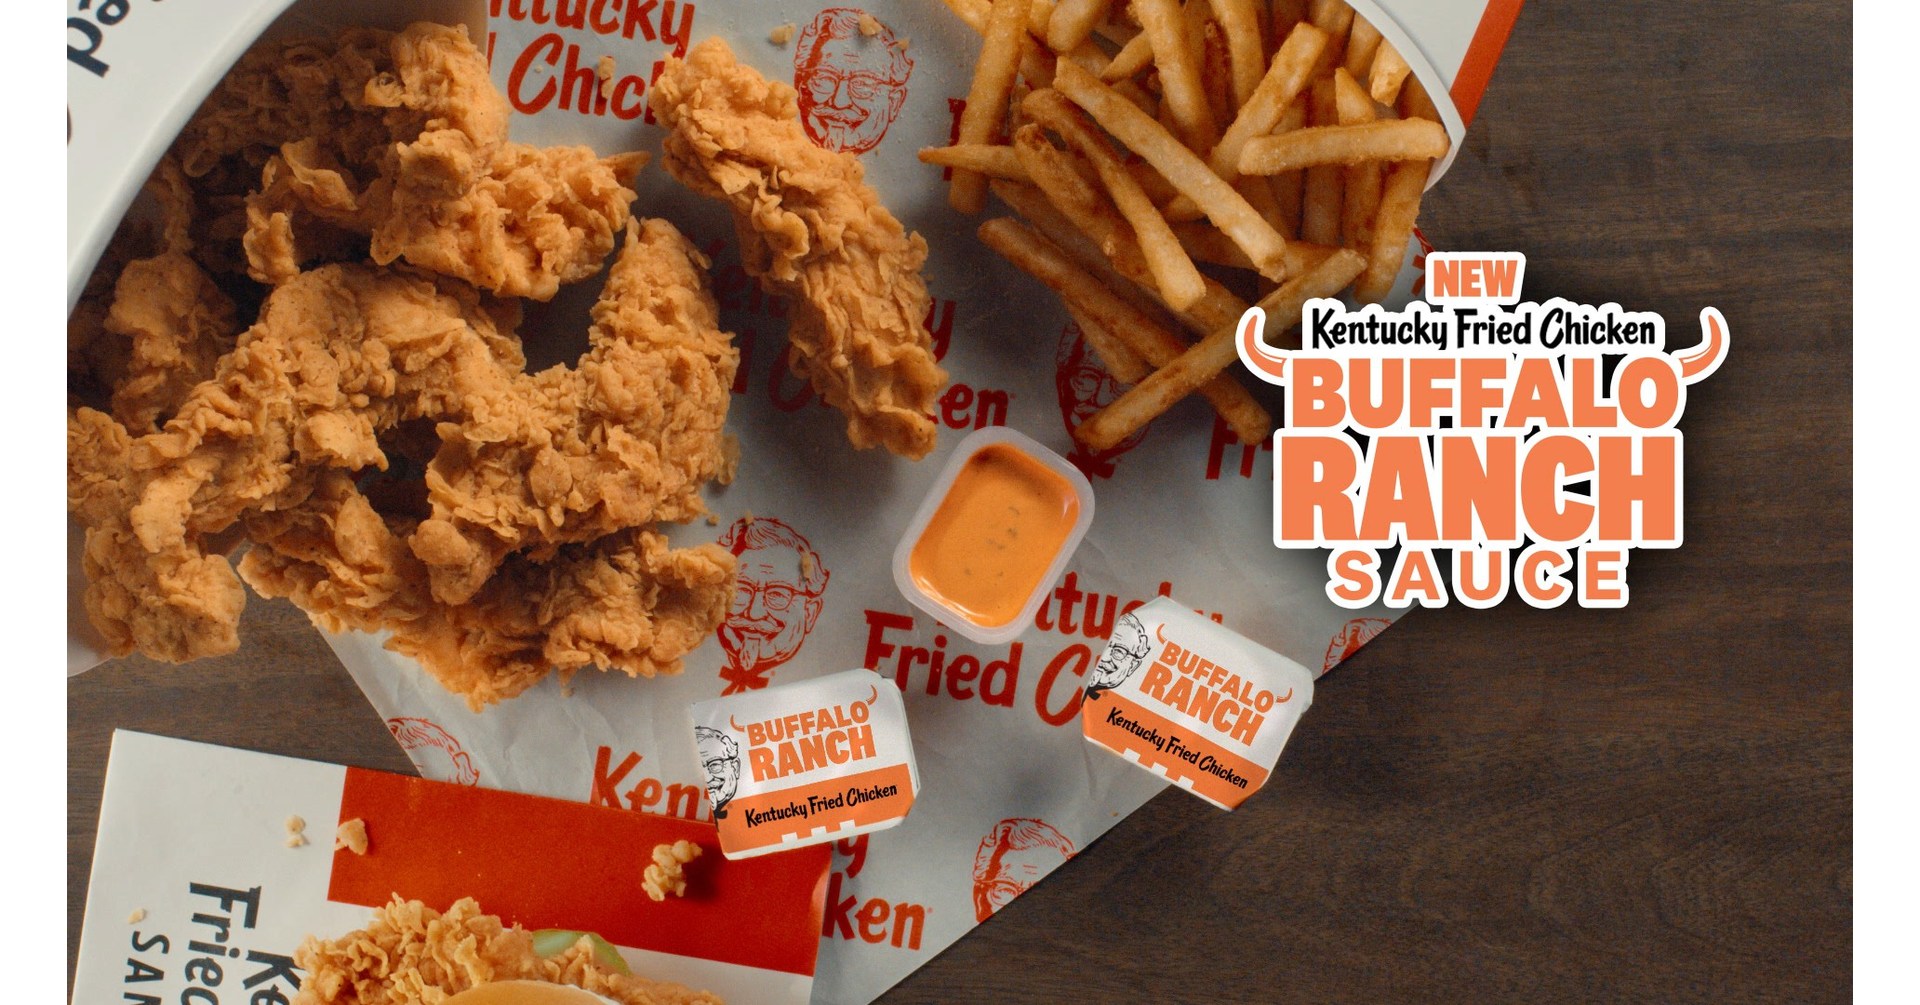 It S A Match Kfc S New Buffalo Ranch Sauce Pairs Perfectly With Its Finger Lickin Good Fried